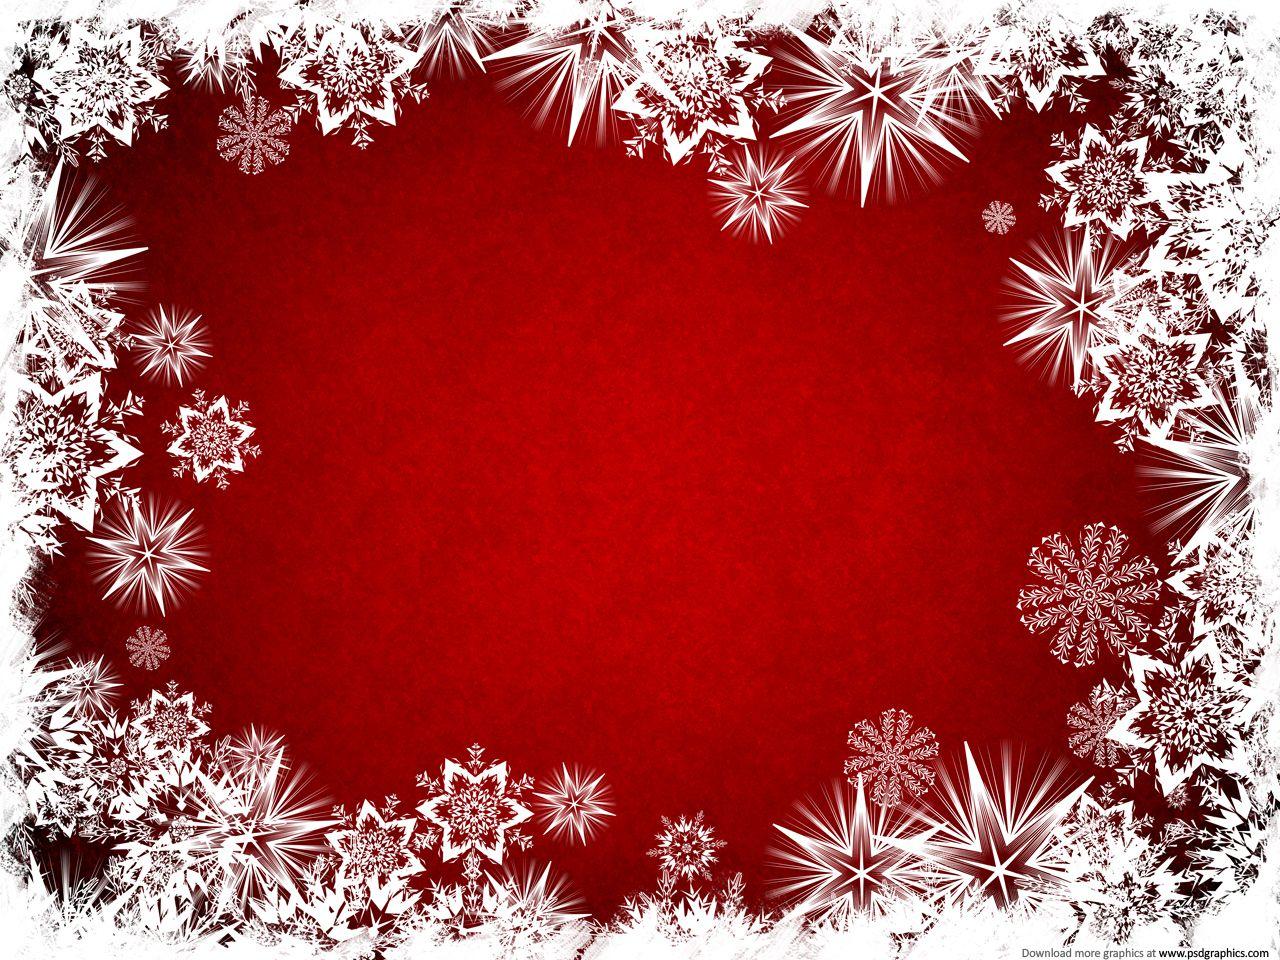 Abstract Christmas background. PSDGraphics. Free christmas background, Christmas background, Christmas wallpaper background